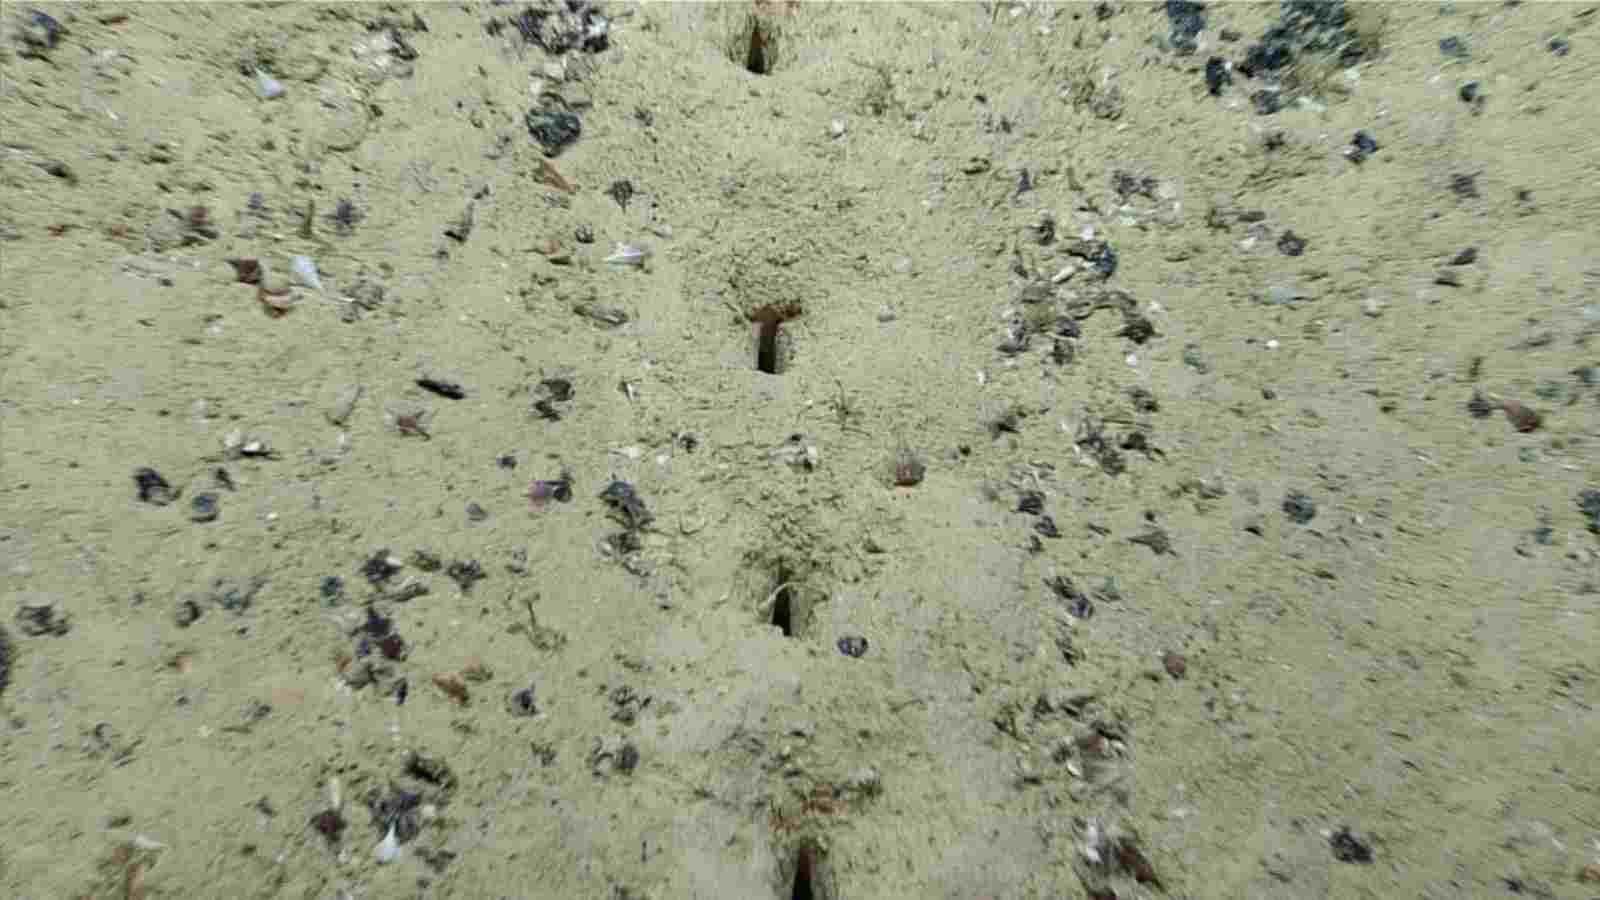 The holes on the seabed in a perfect straight line.